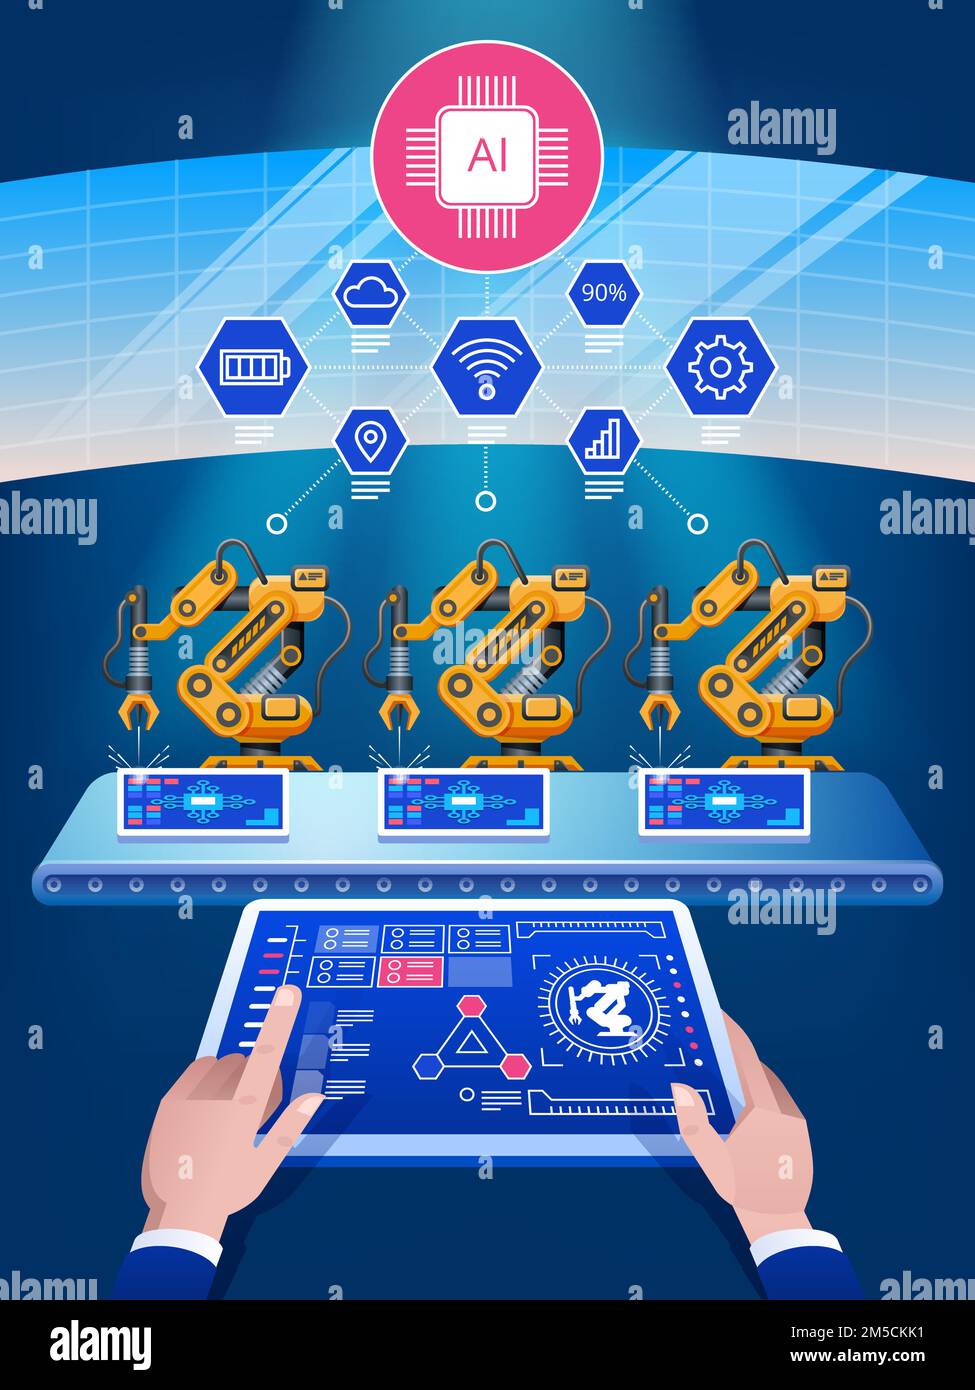 Artificial intelligence Smart industry 4.0, automation and user interface concept: users connecting with a tablet and a smartphone, exchanging data wi Stock Vector